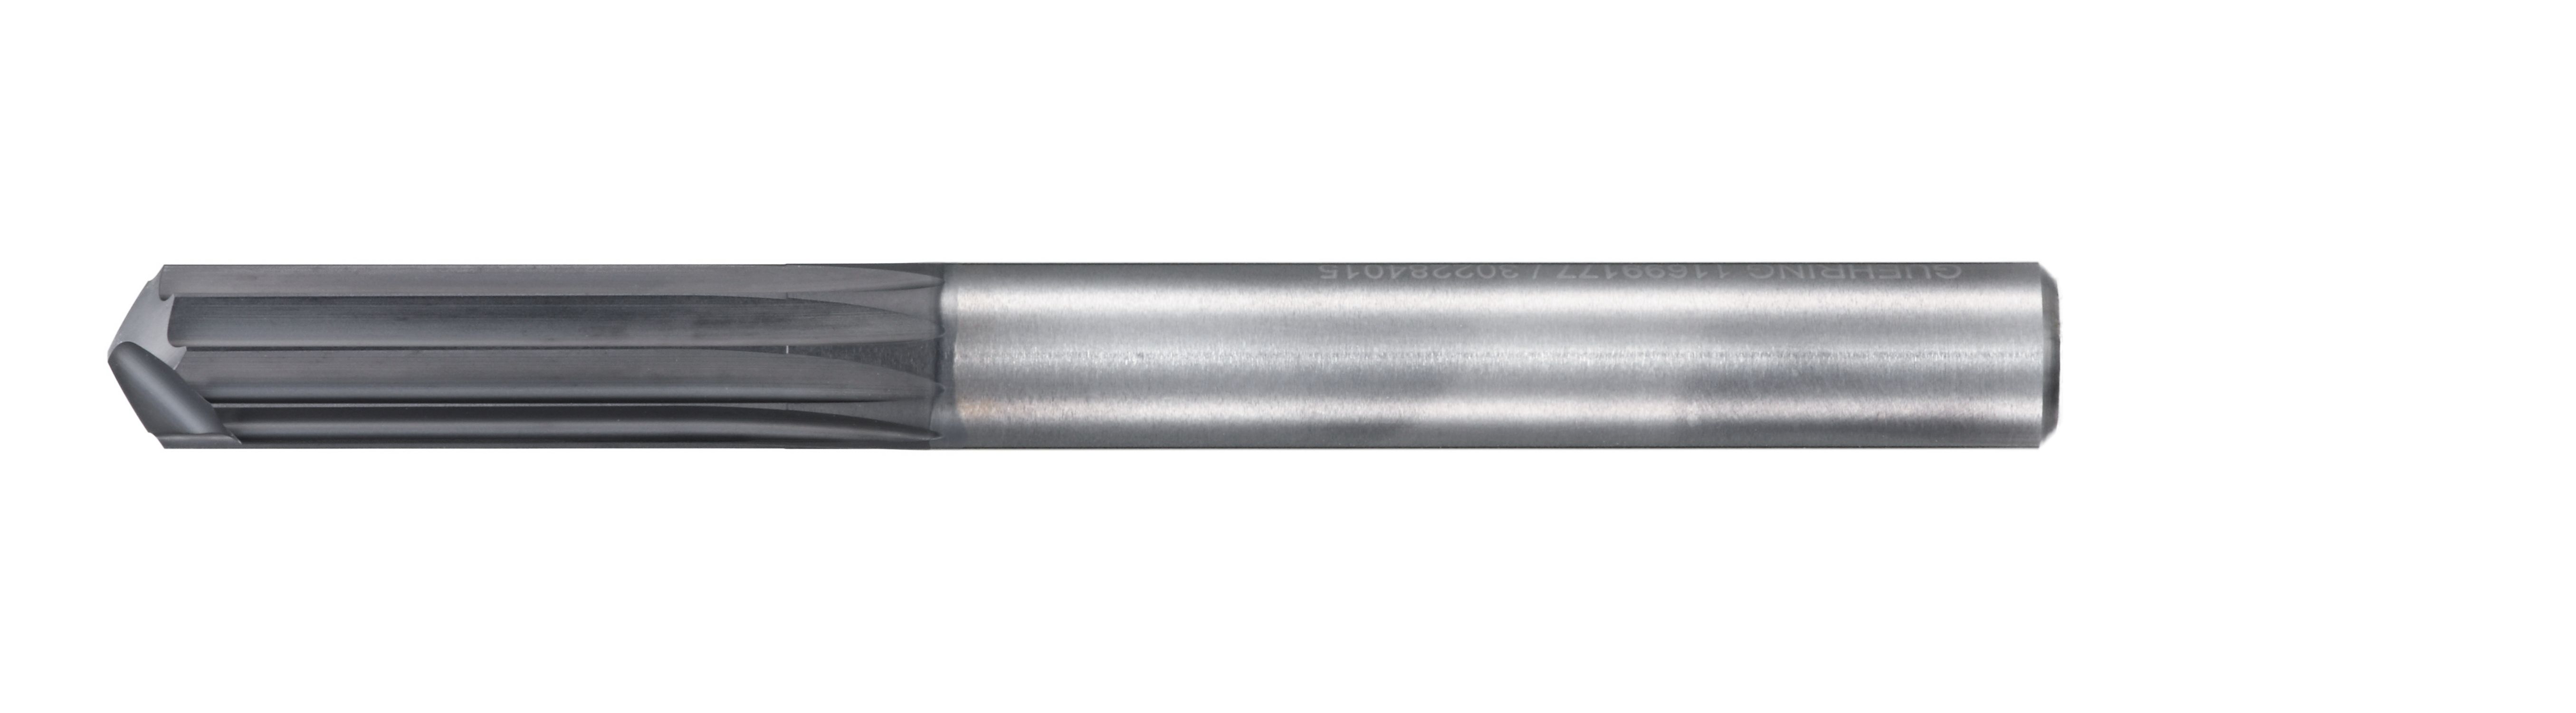 Grooving/Shouldering Multi-Flute End Mill for CFRP with Drill Point CR100 6720 6720-010.000